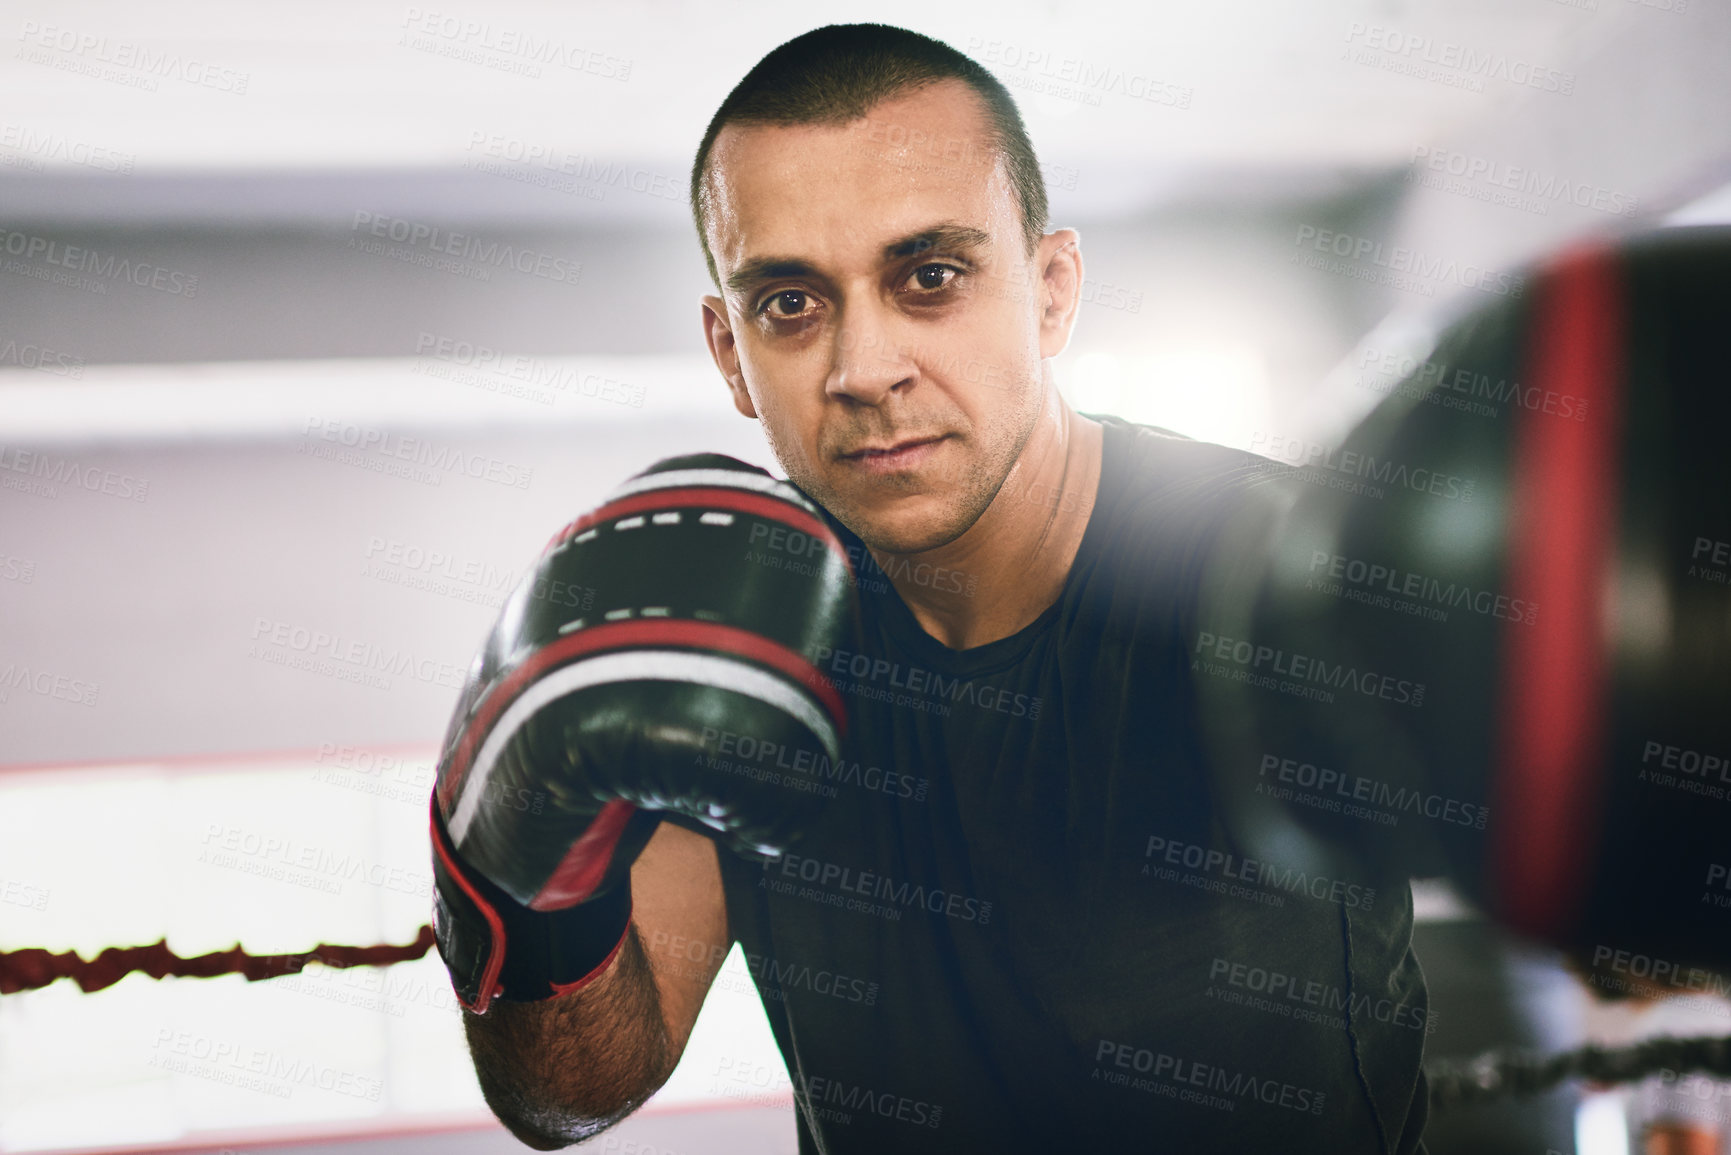 Buy stock photo Portrait of a confident young male boxer wearing boxing gloves while throwing punches at the camera inside of a ring at a gym during the day